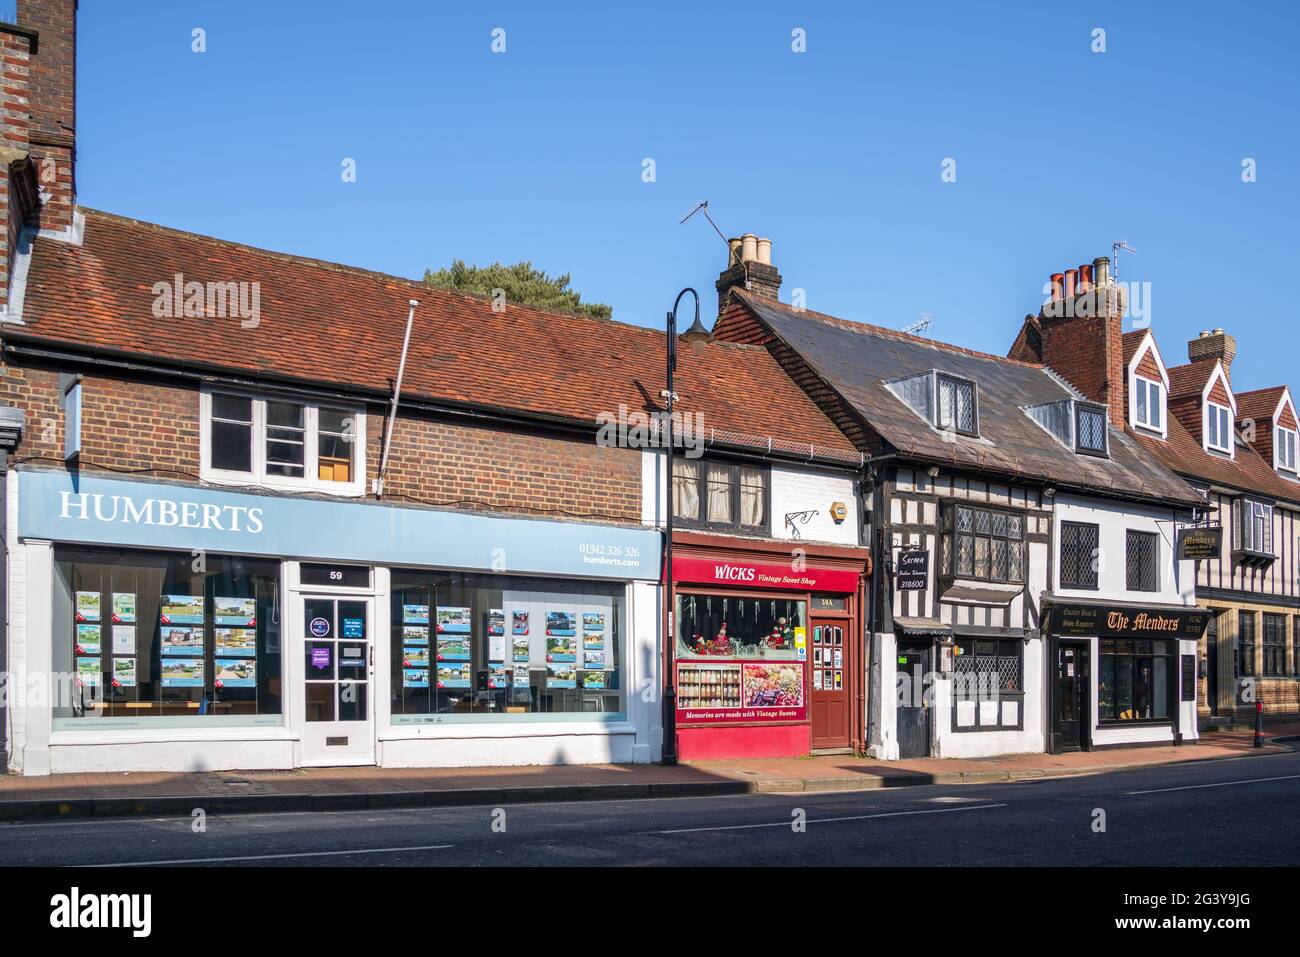 EAST GRINSTEAD, WEST SUSSEX, UK - MARCH 1: View of shops in the High Street  in East Grinstead on March 1, 2021 Stock Photo - Alamy